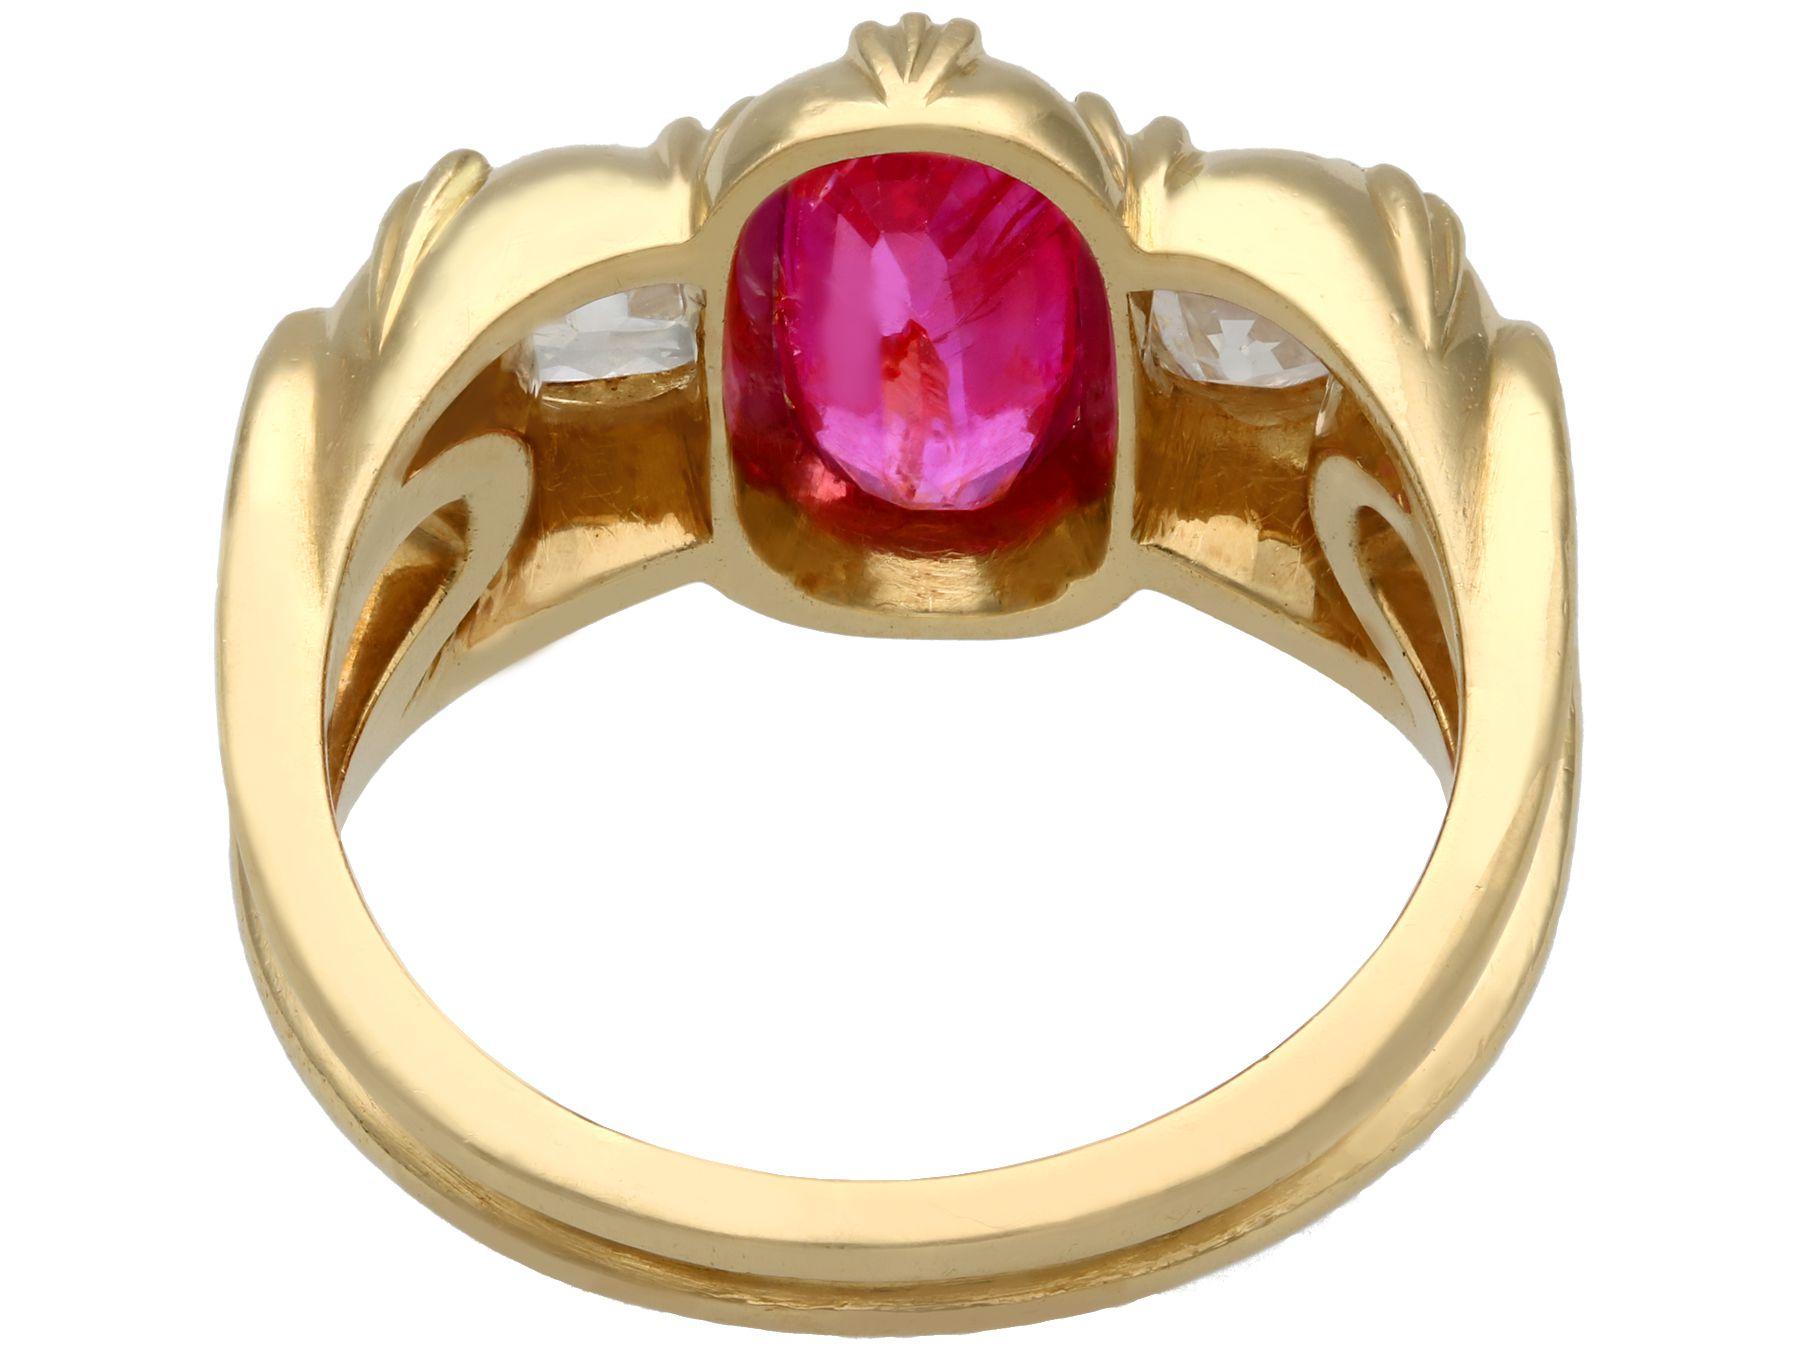 Antique 2 Carat Oval Cut Ruby and Diamond Yellow Gold Cocktail Ring In Excellent Condition For Sale In Jesmond, Newcastle Upon Tyne